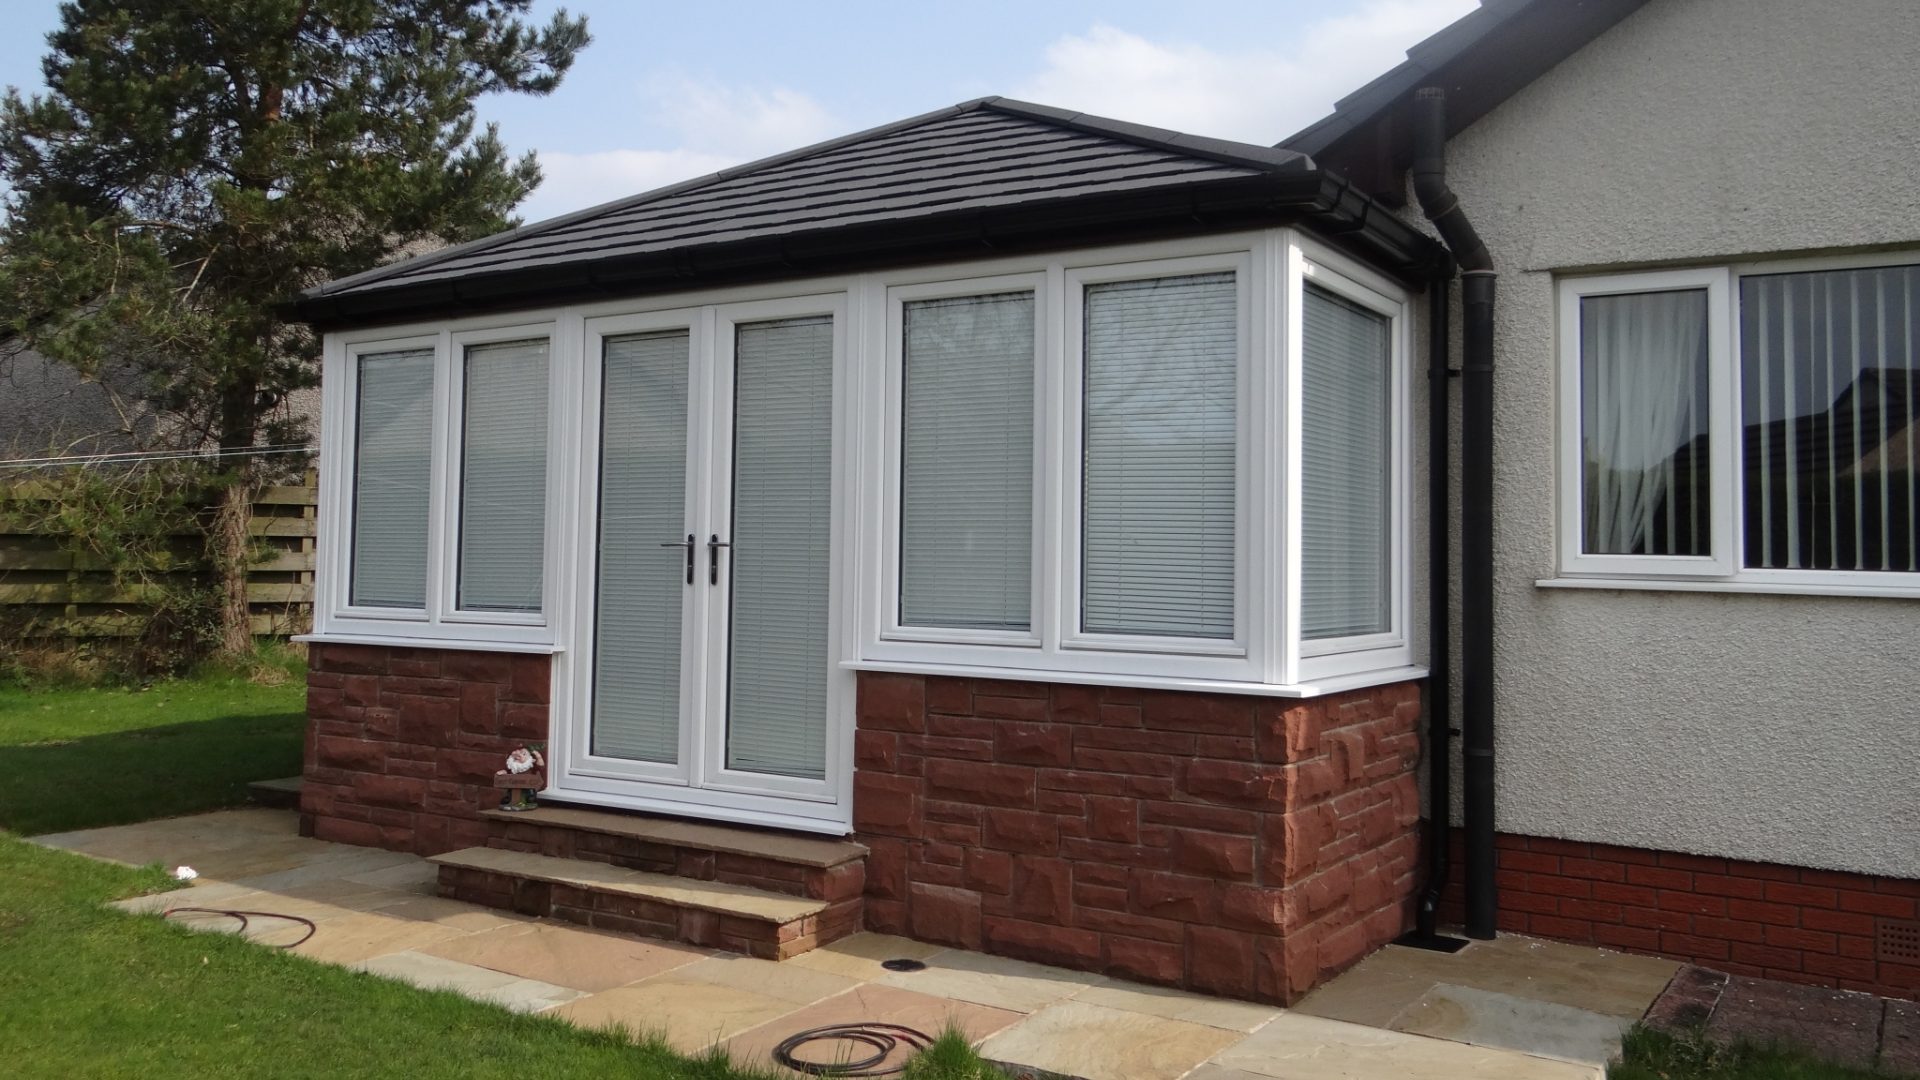 A solid roof conservatory extension, with a black slate tiled roof, on a sunny day.